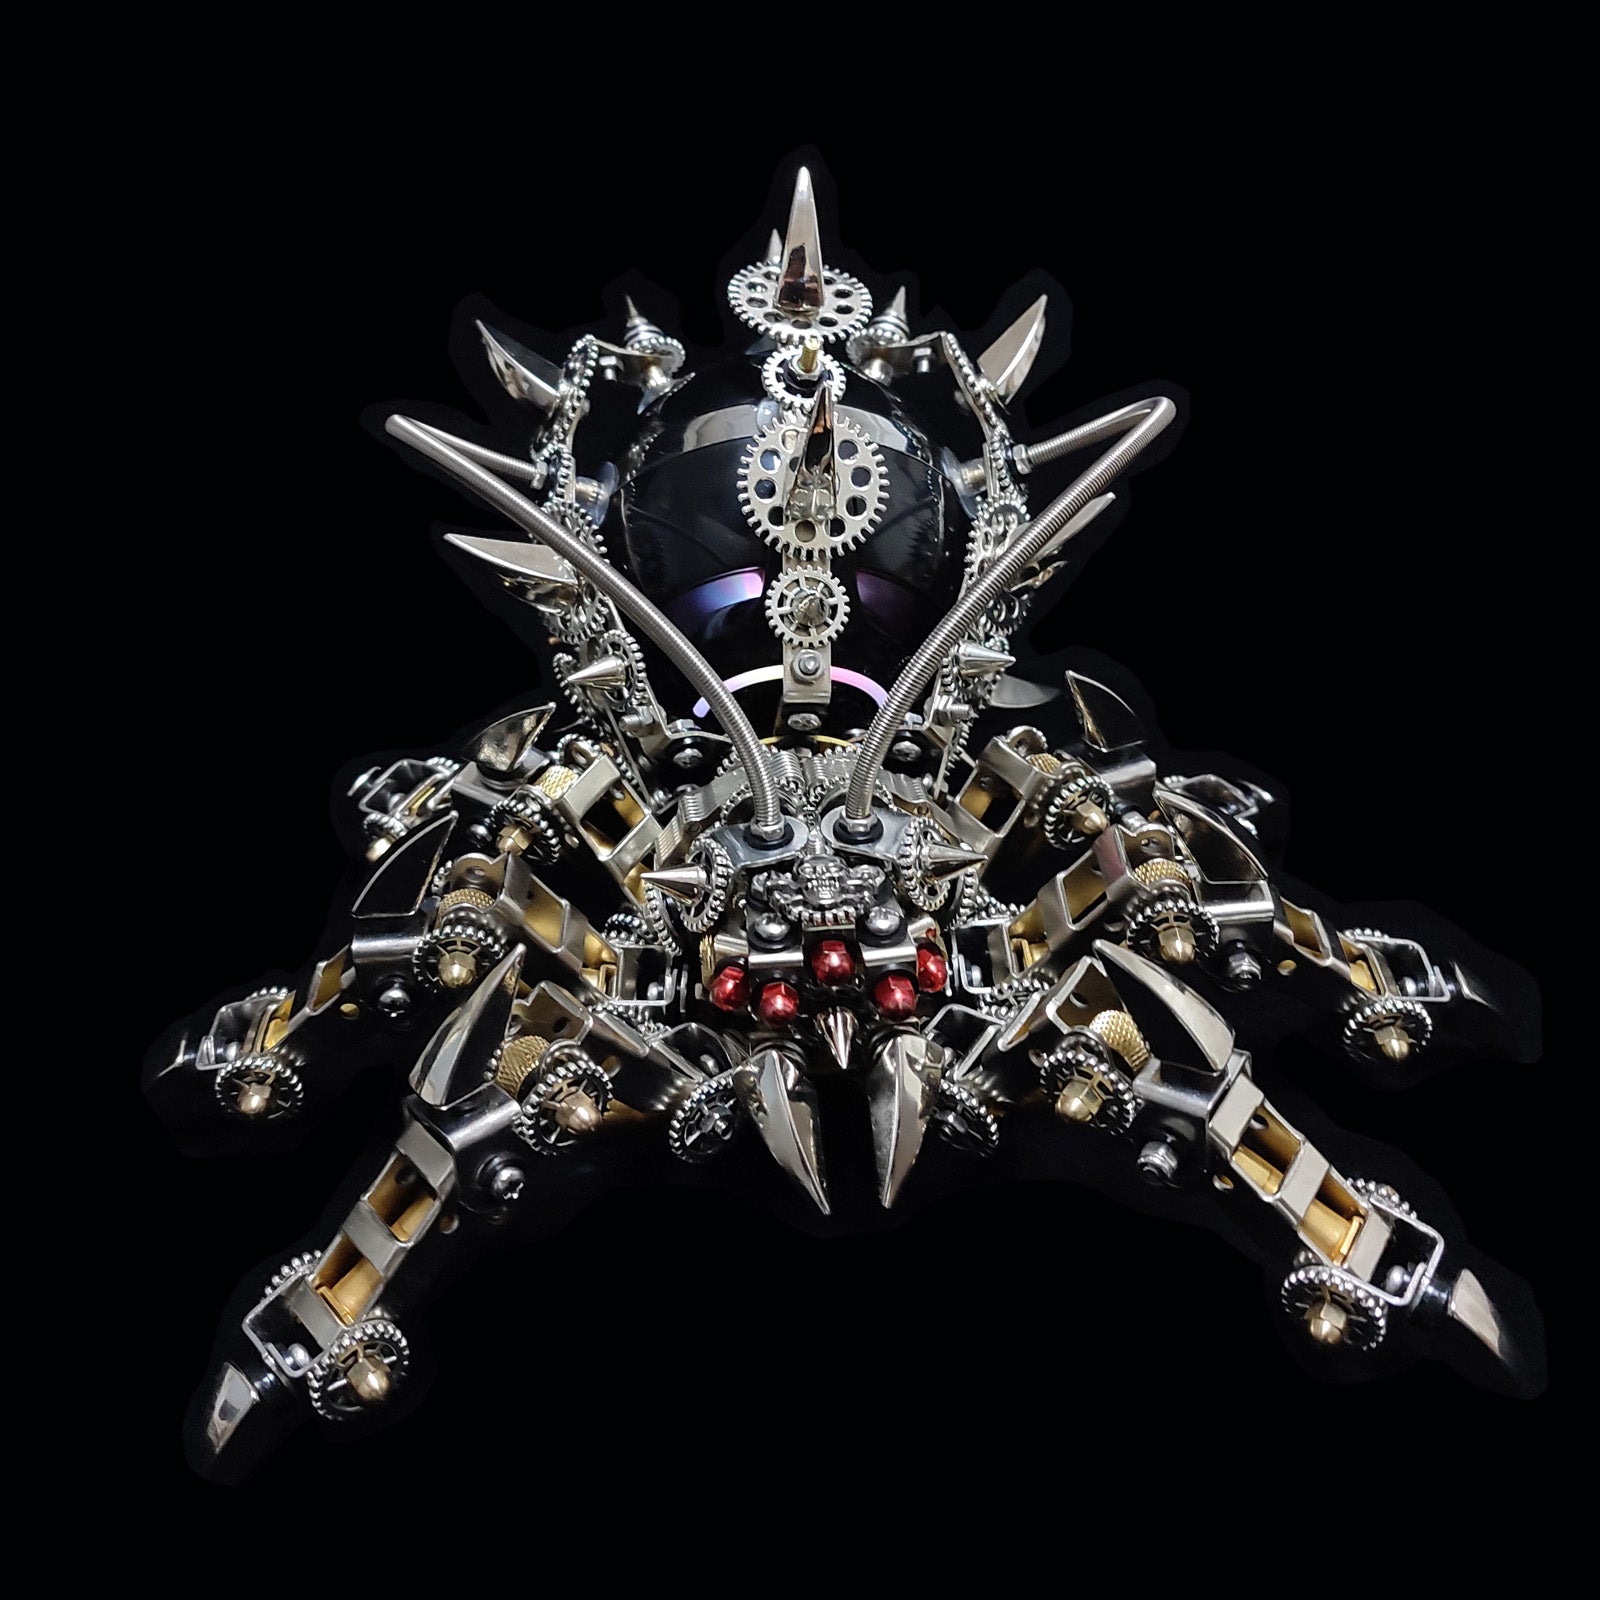 800pcs+ DIY 3D Metal Spider King Model Kit Bluetooth Speaker Assembly Difficult Puzzle